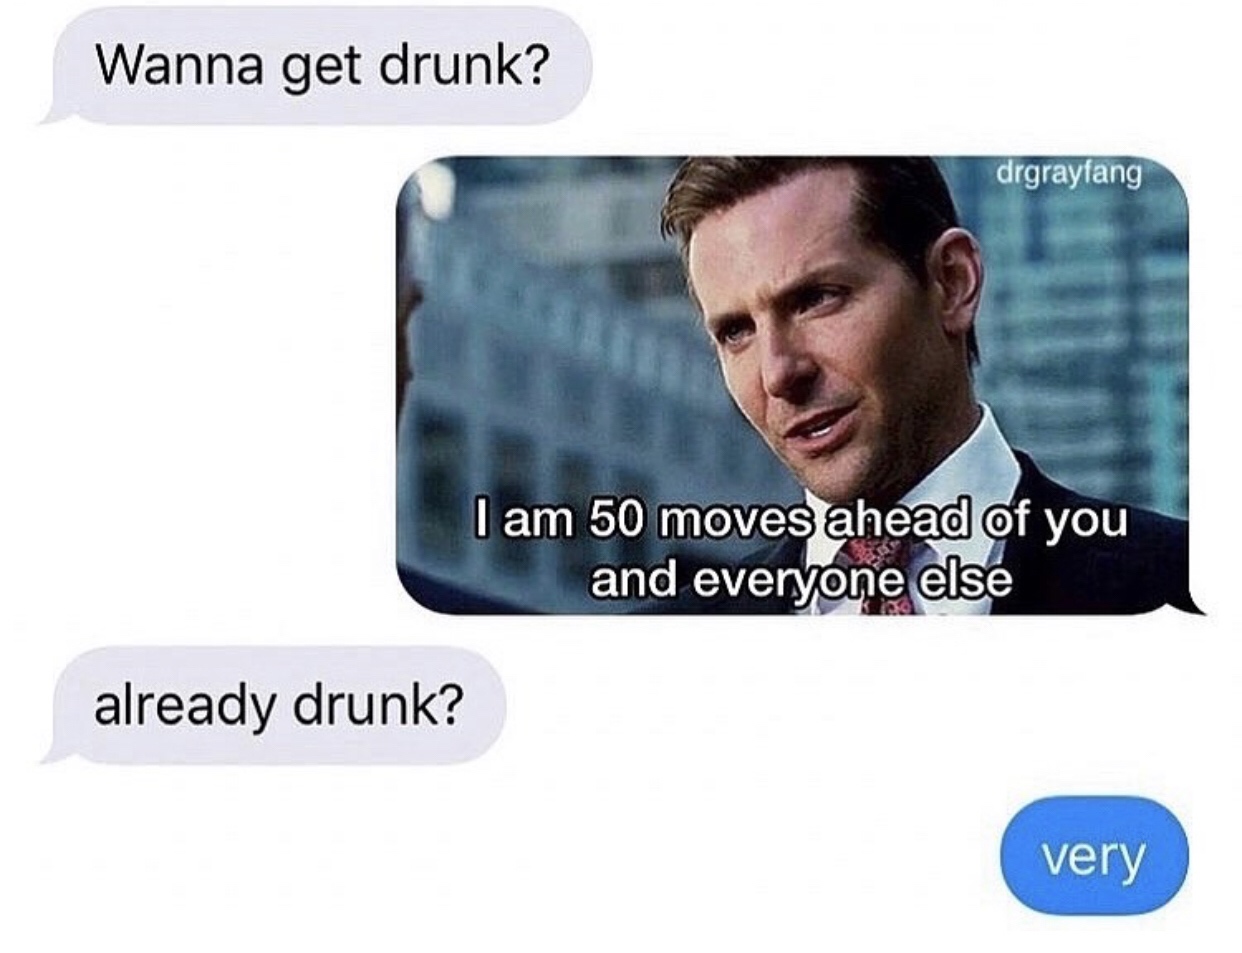 im 50 steps ahead of you meme - Wanna get drunk? drgrayfang I am 50 moves ahead of you and everyone else already drunk? very